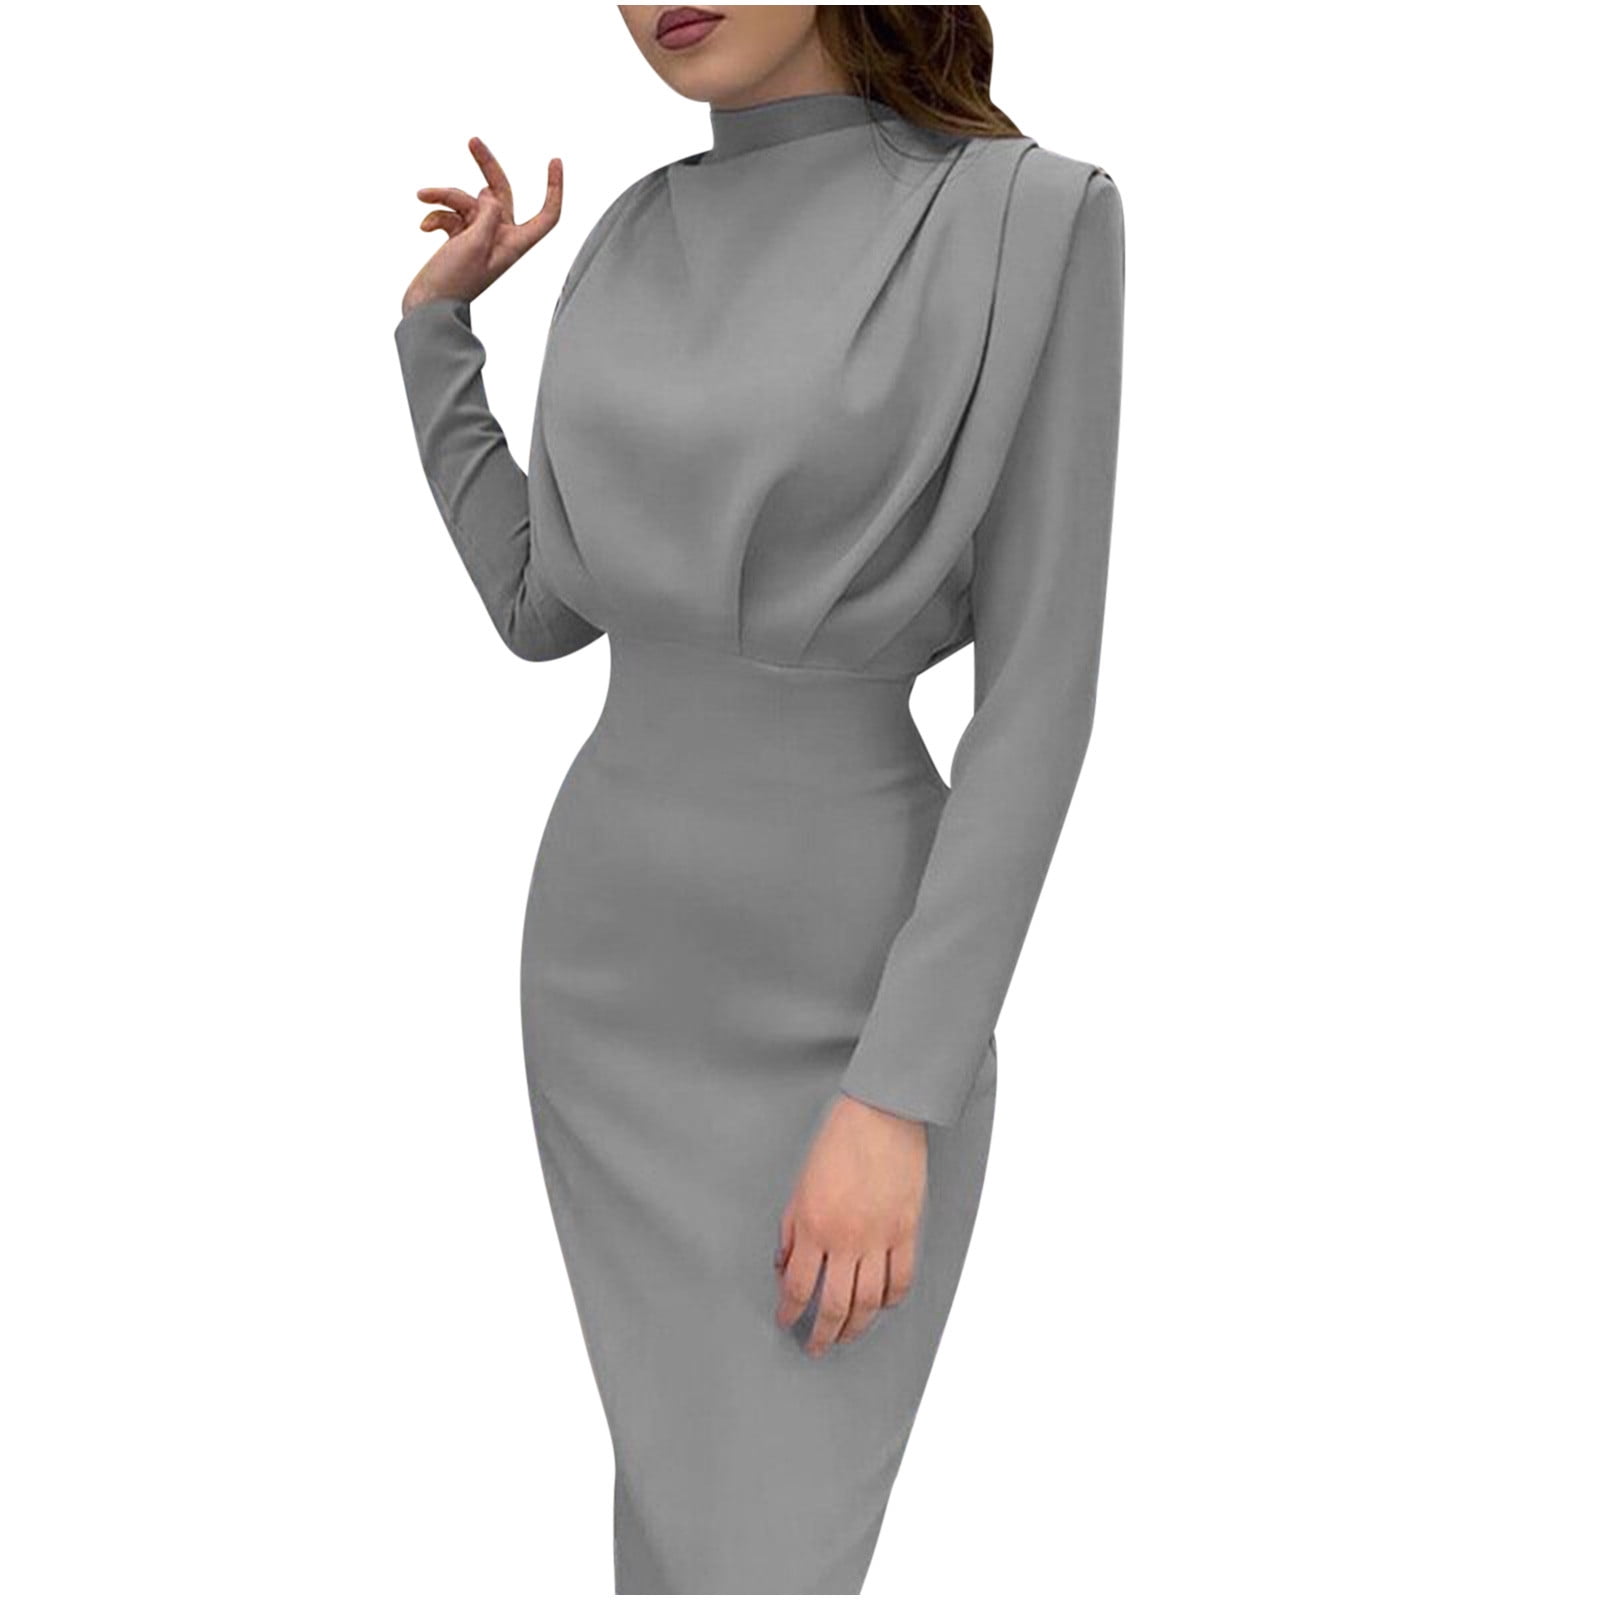 Adjustable lengths gray gown – Fashion Brand Company